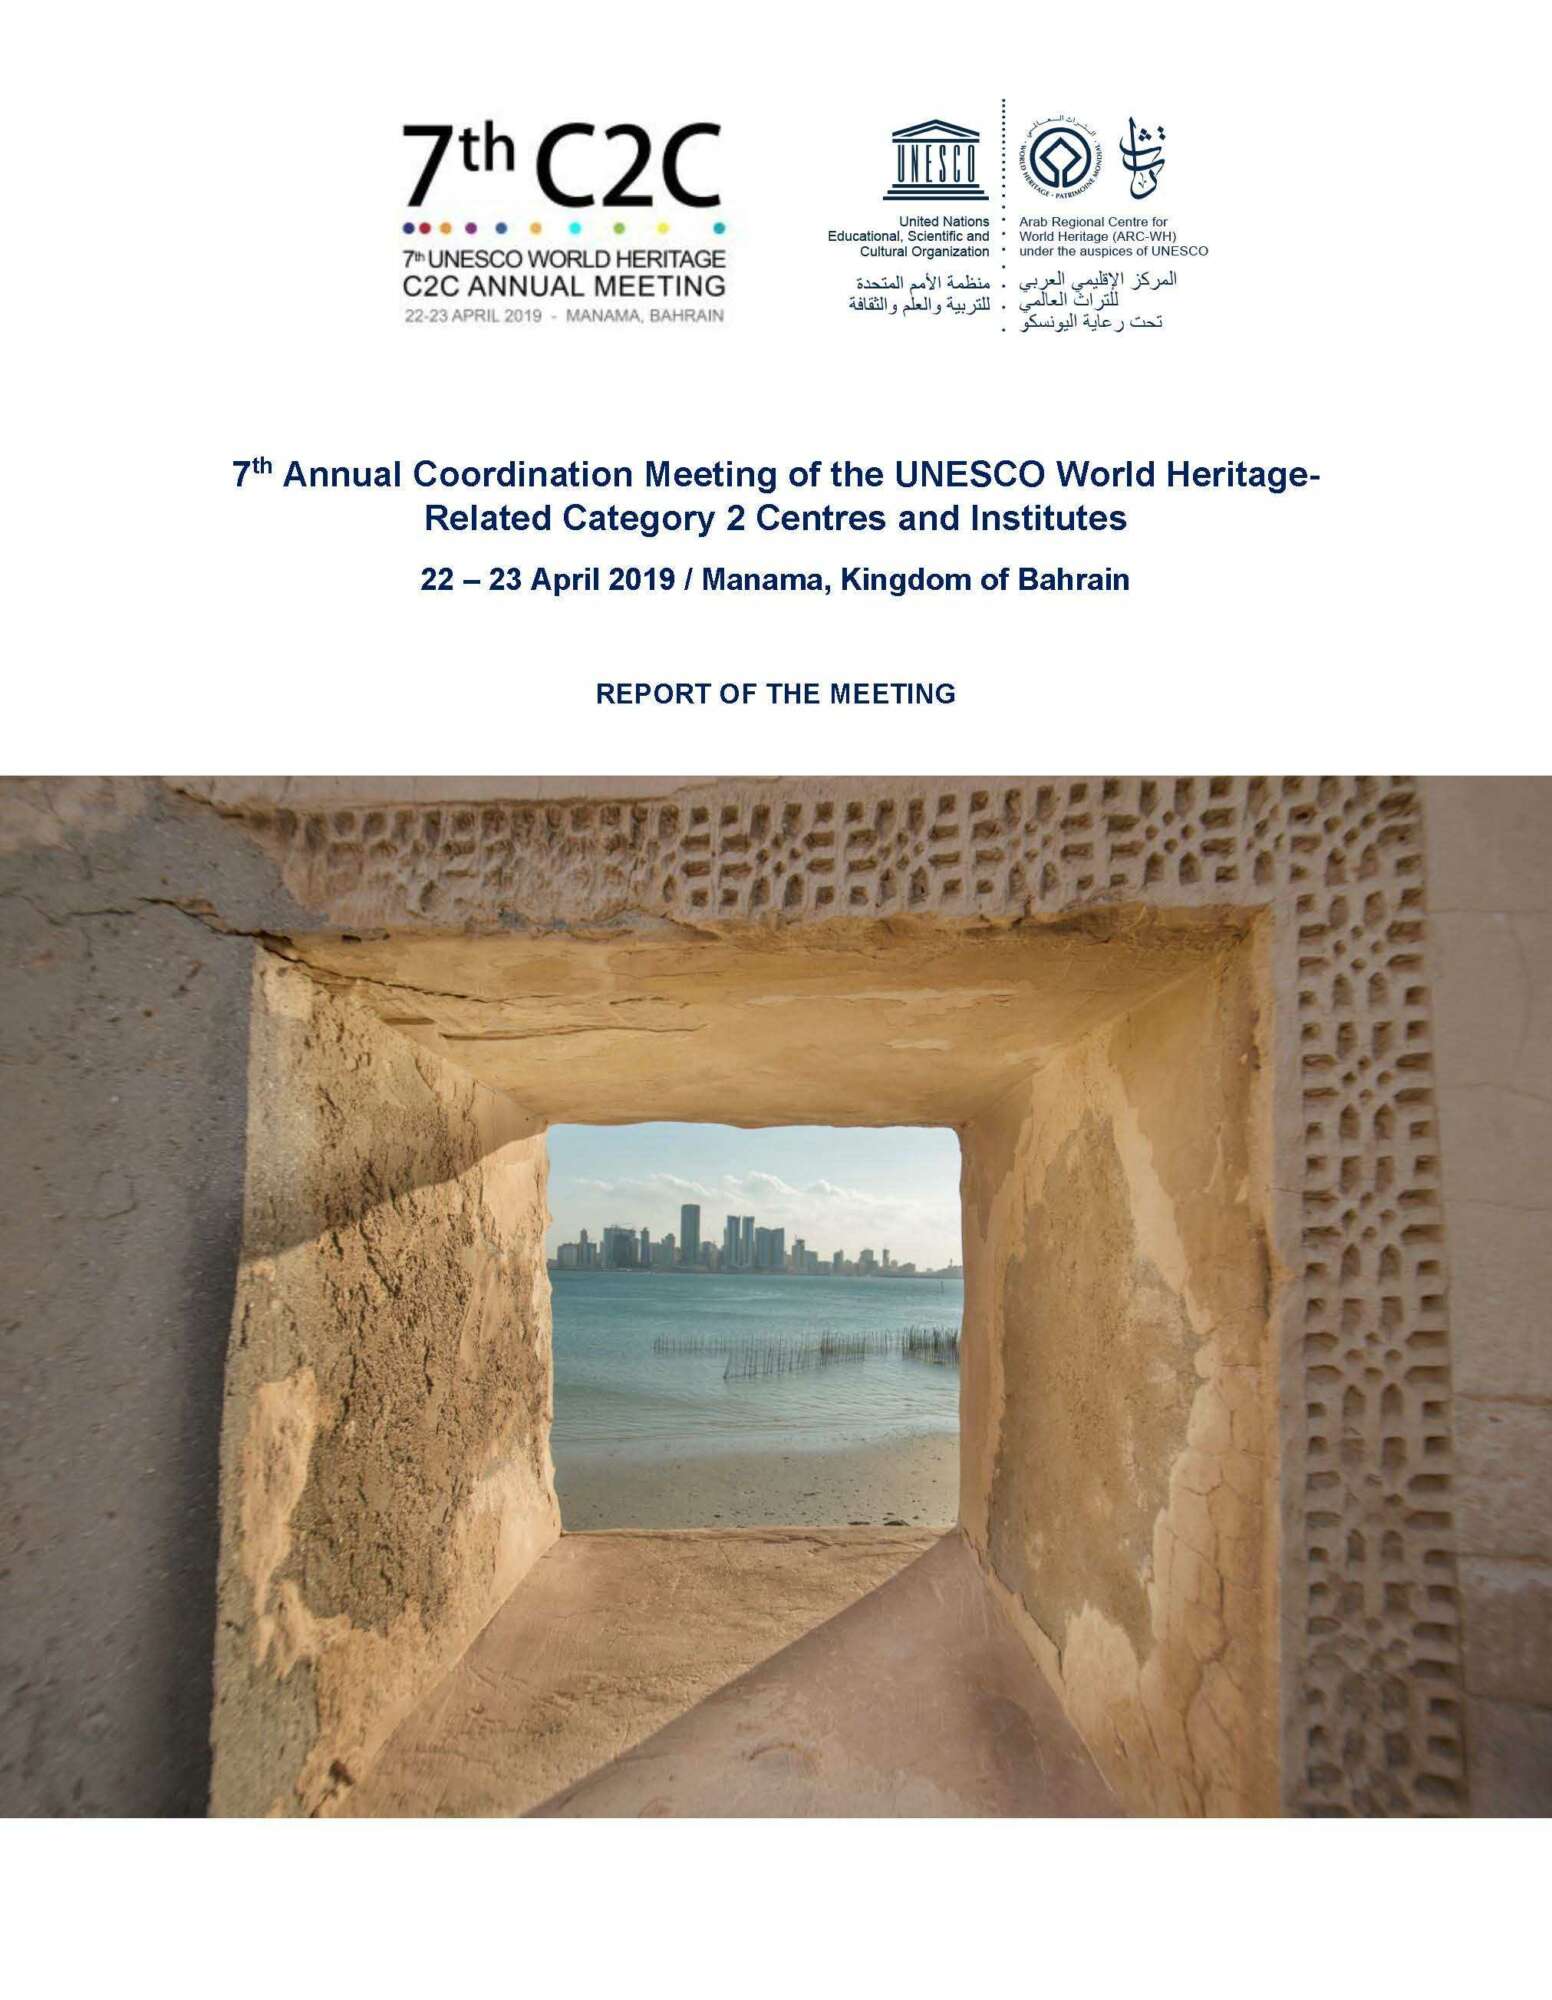 Final Report of the 7th Annual Coordination Meeting of the UNESCO World Heritage-Related Category 2 Centres and Institutes